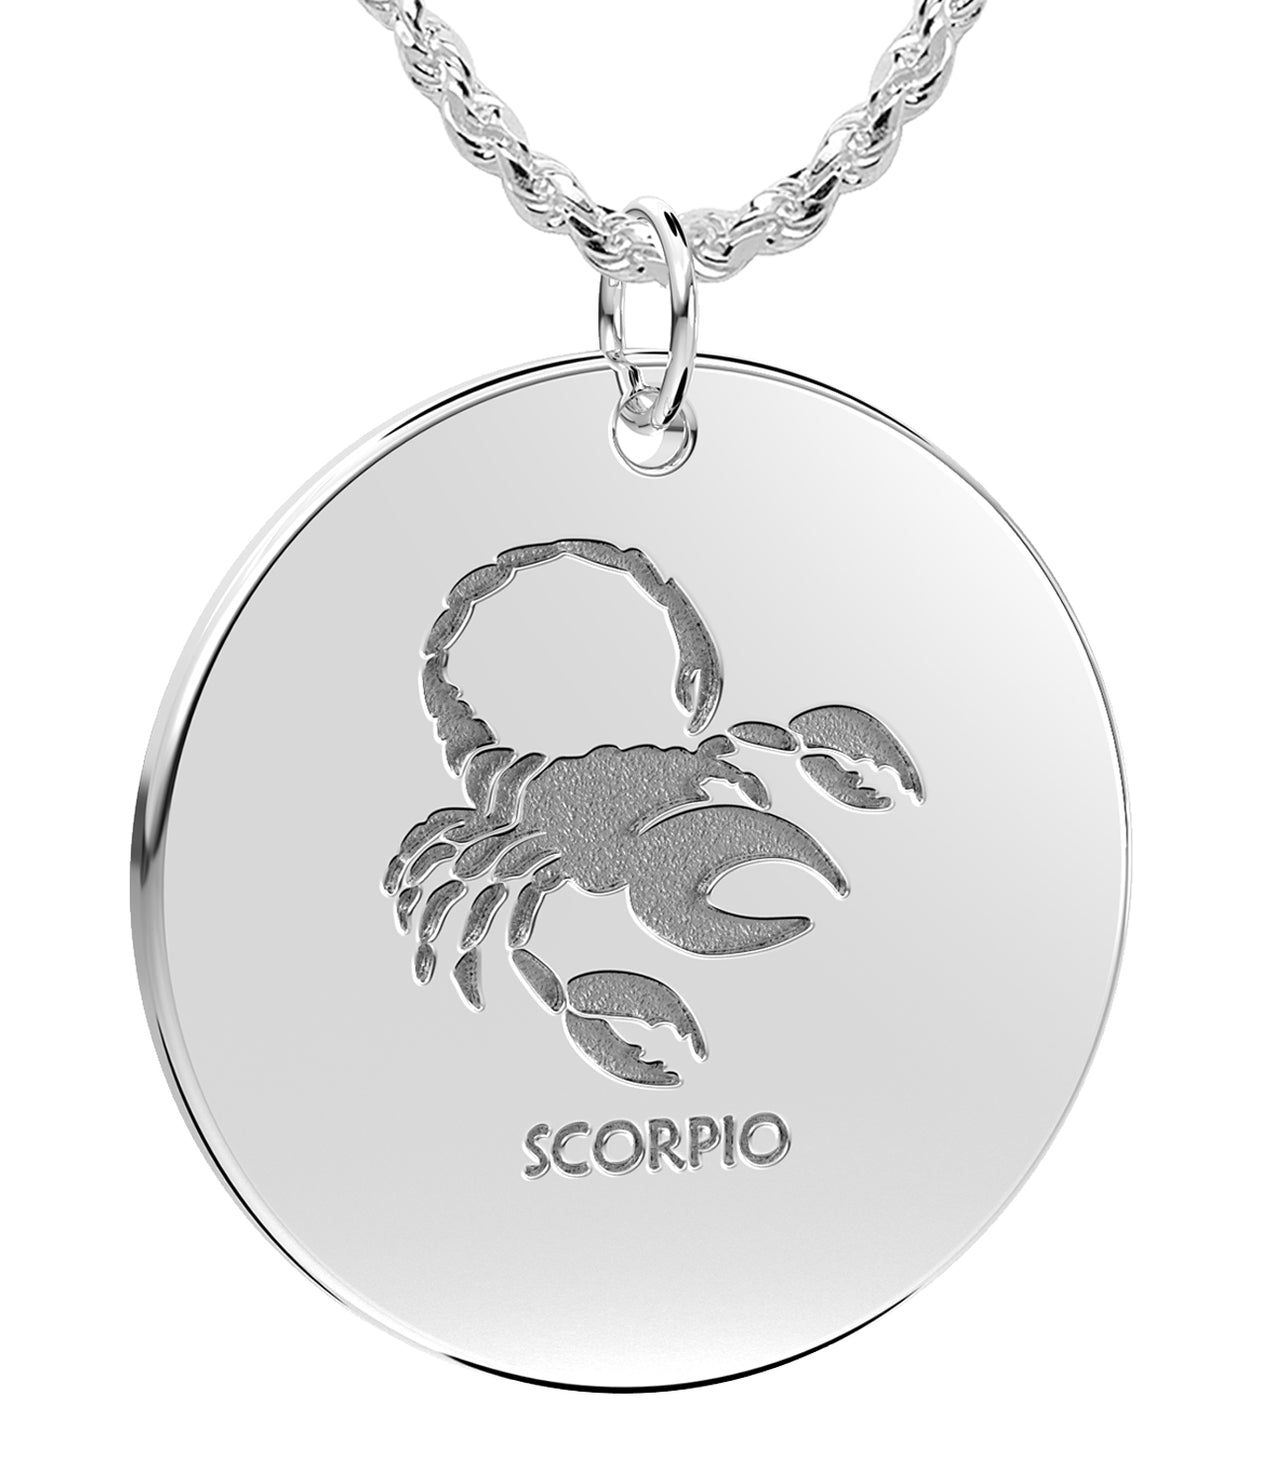 Ladies 925 Sterling Silver 1in Round Scorpio Zodiac Polished Pendant Necklace